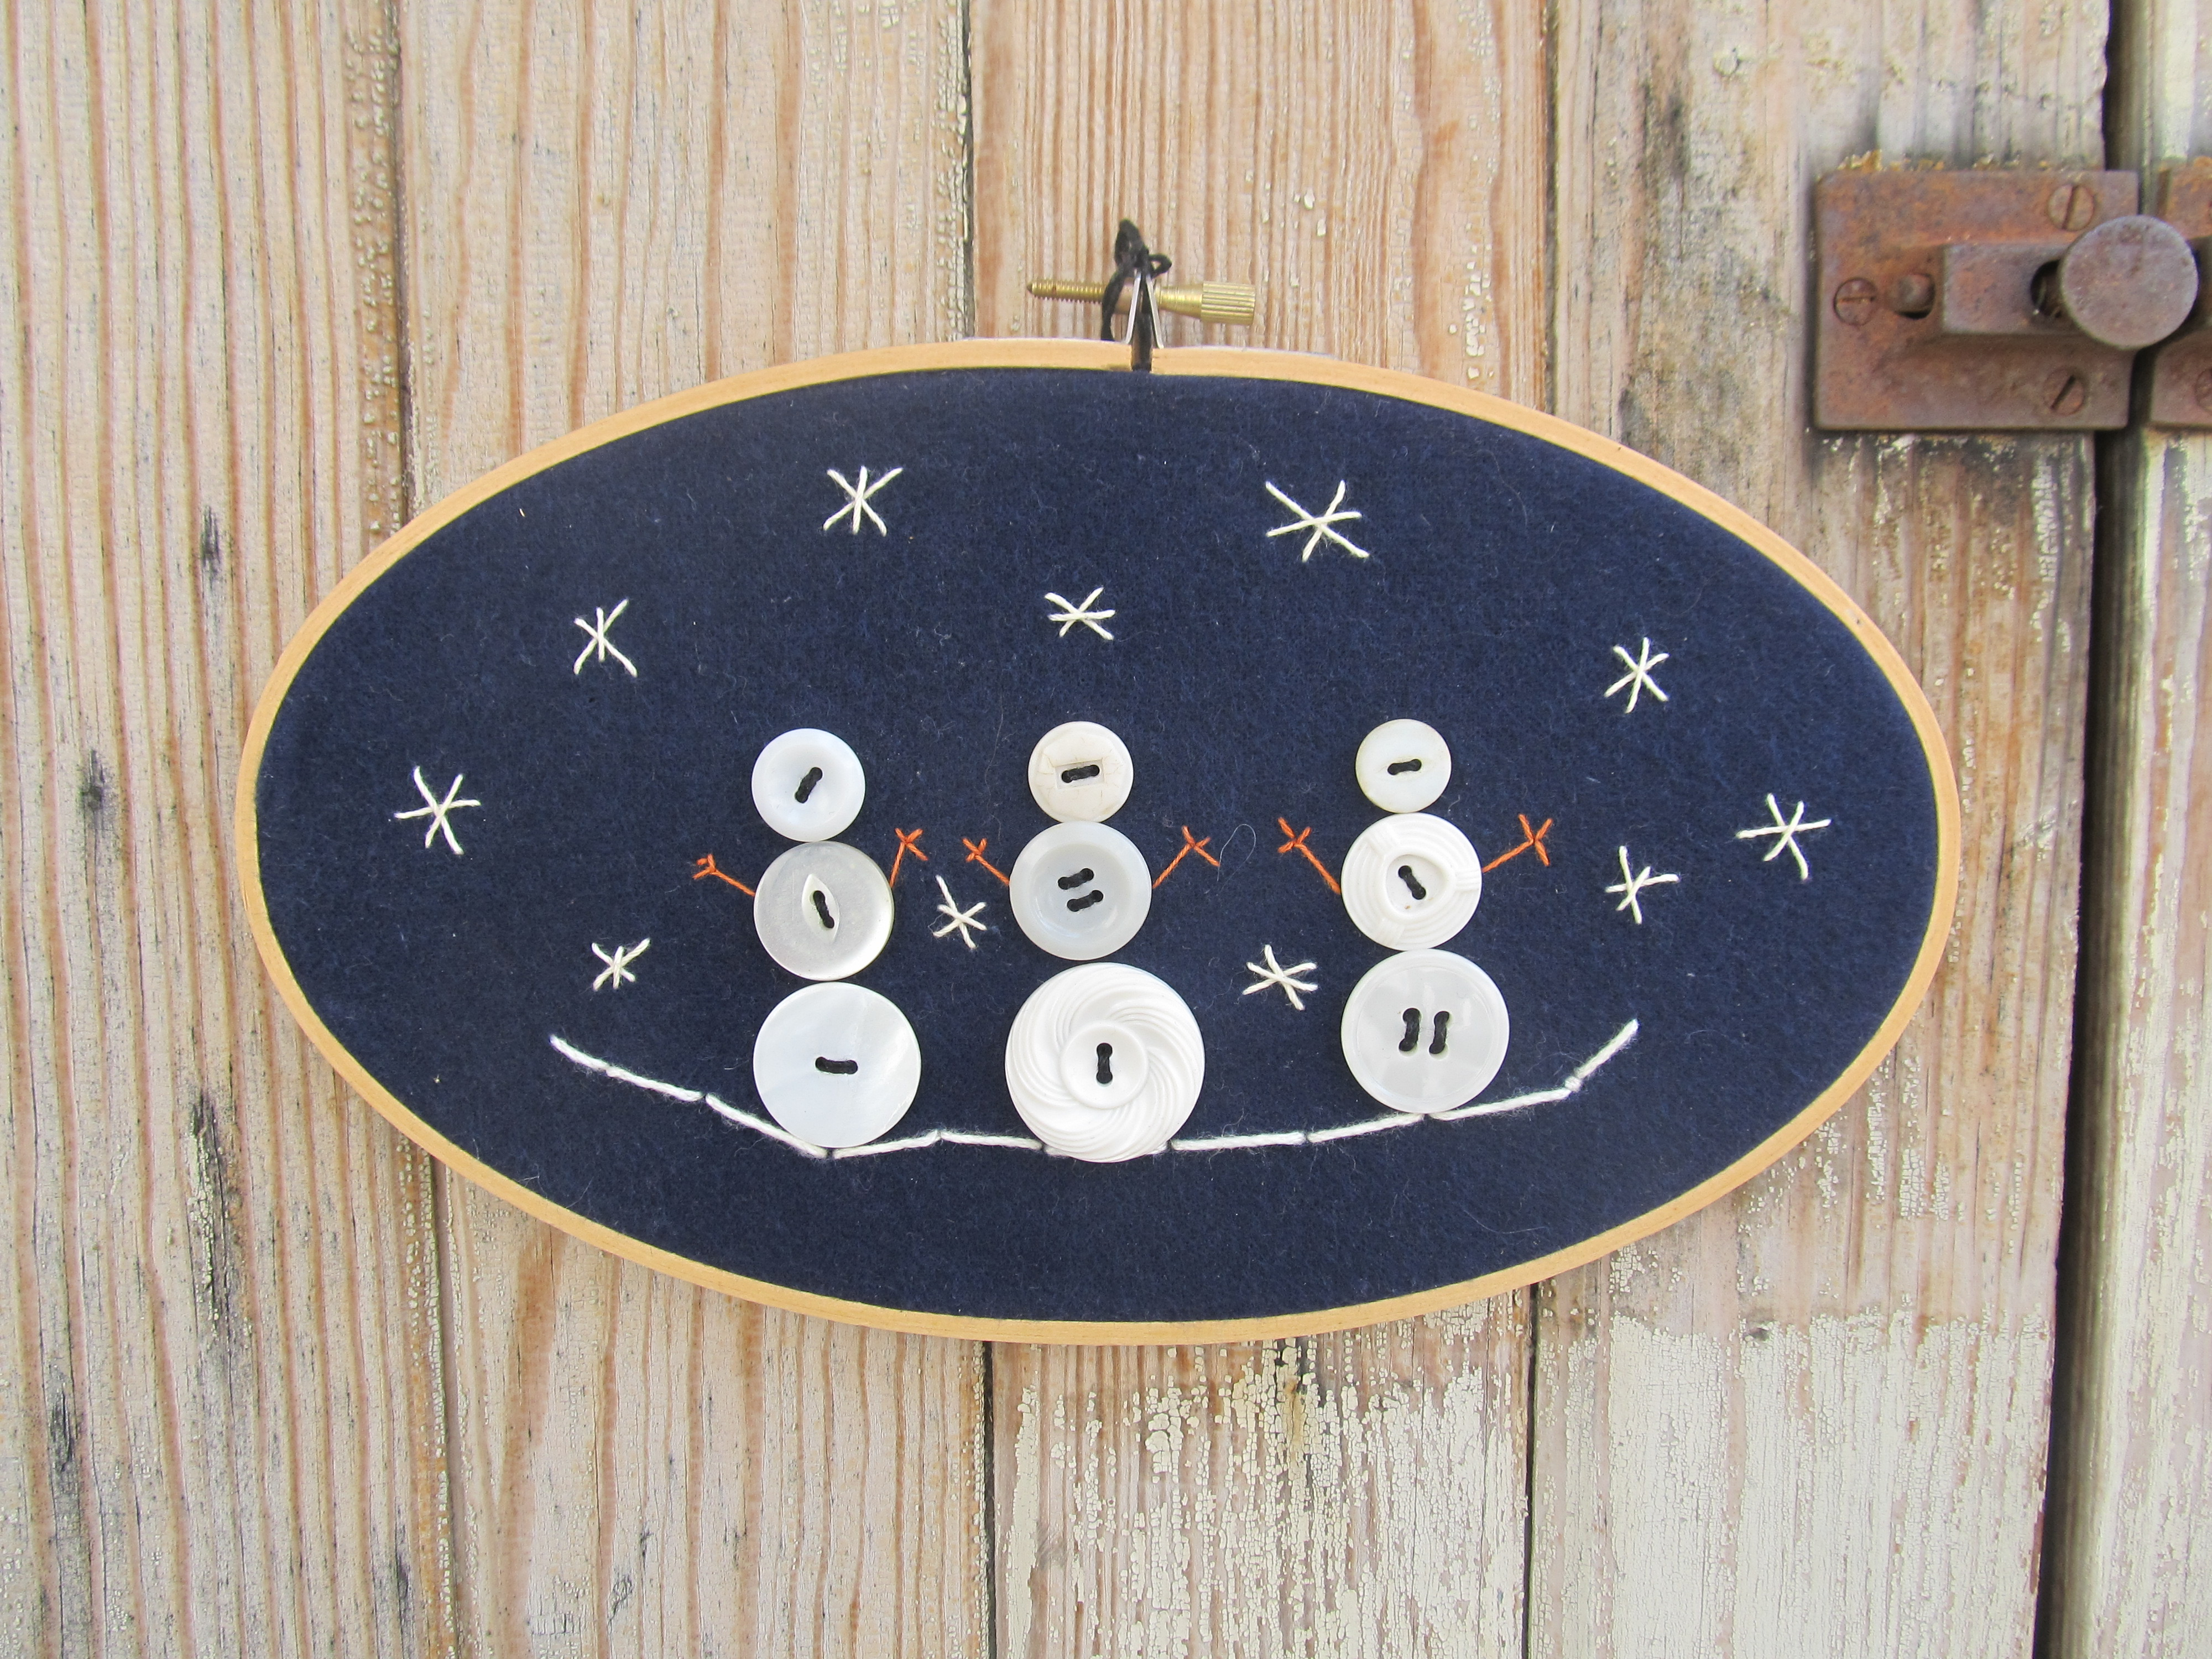 Primitive Hand Embroidery Patterns Primitive Winter Hand Made Vintage Button Snowmen At Night Oval Embroidery Hoop Frame